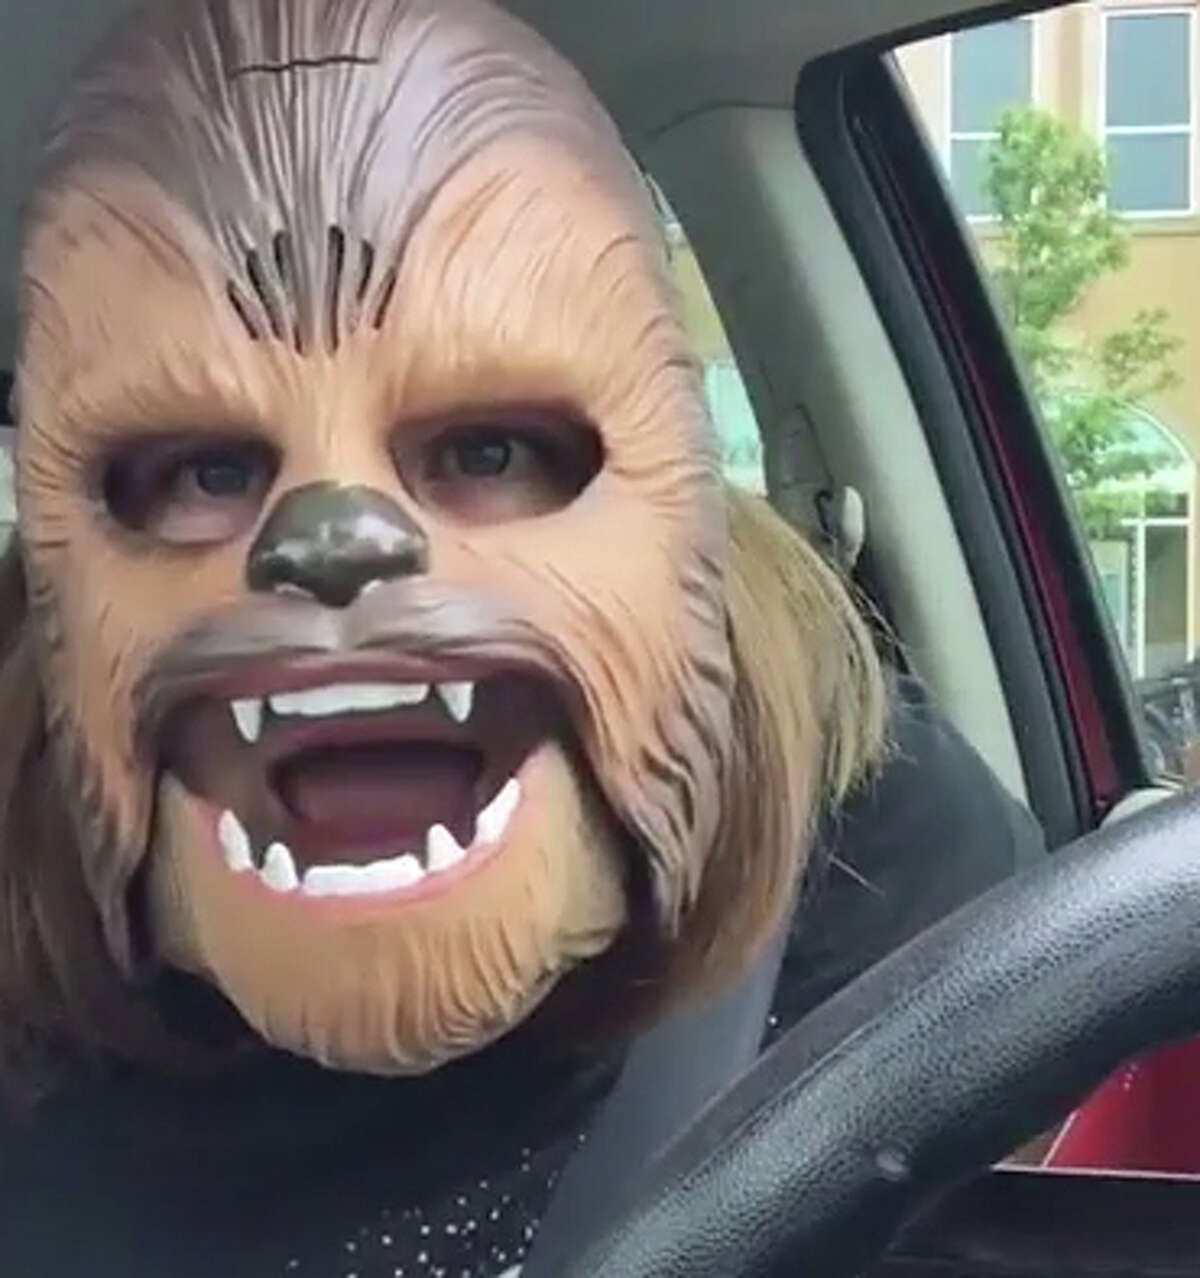 Reports: Laughing in Chewbacca mask gets $420K in including